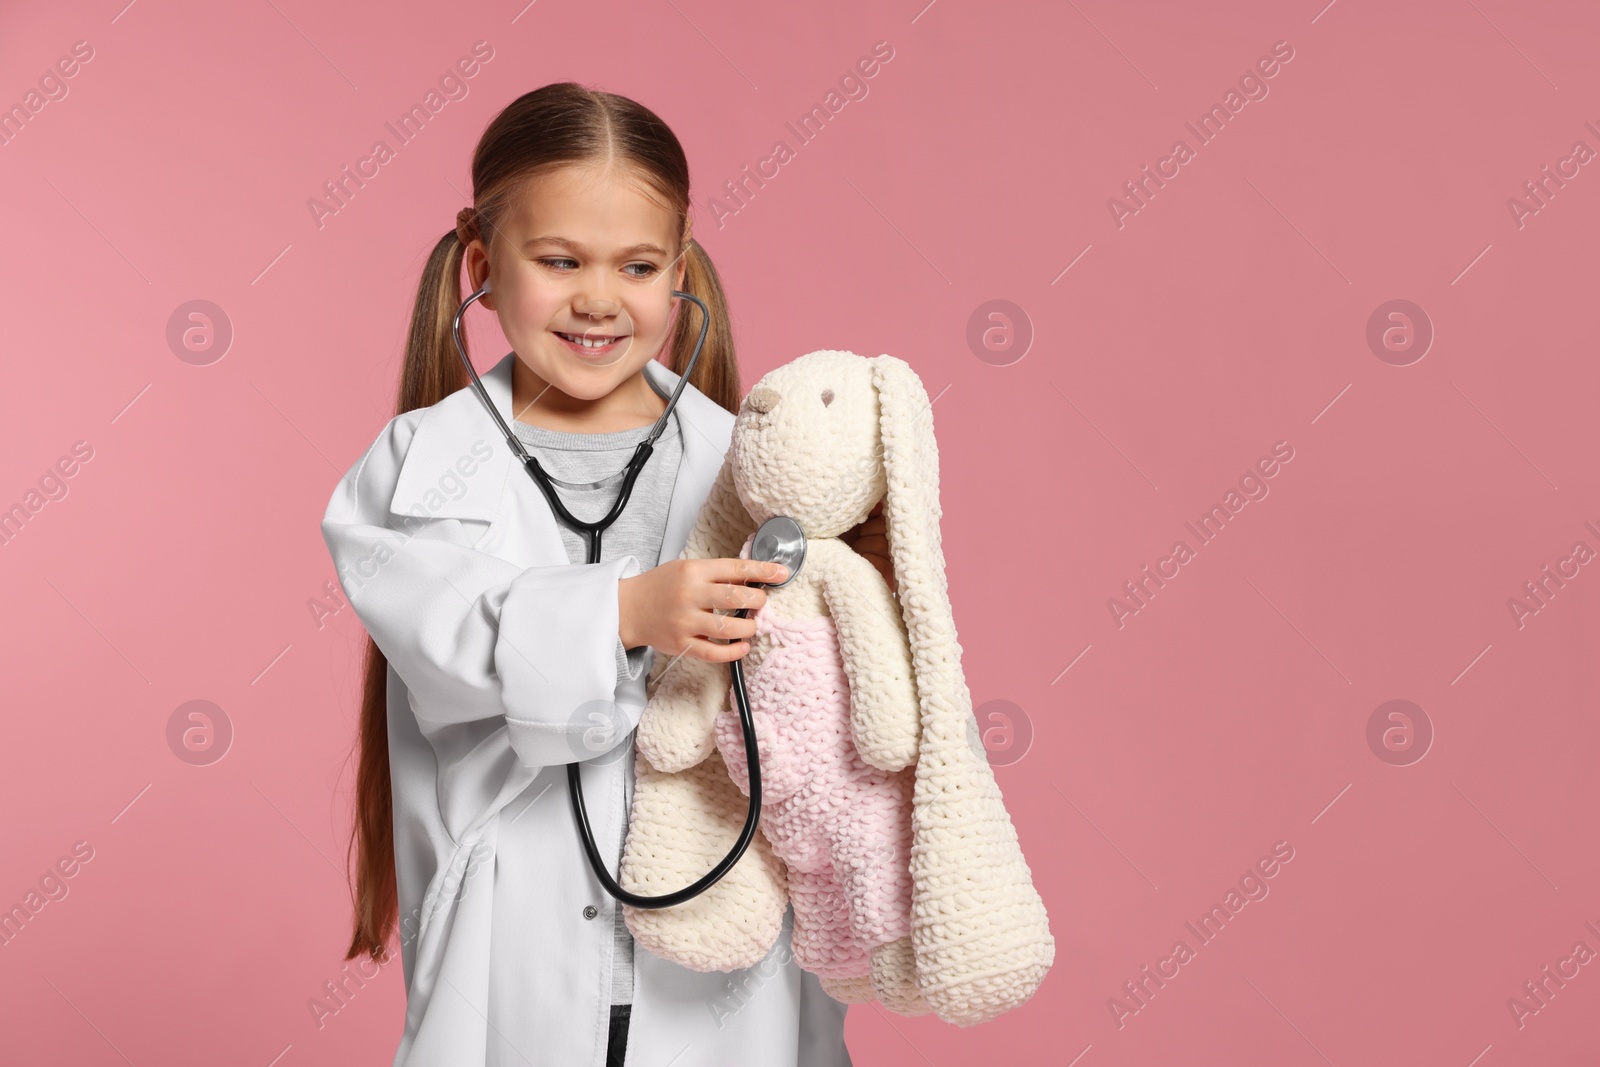 Photo of Little girl in medical uniform examining toy bunny with stethoscope on pink background. Space for text